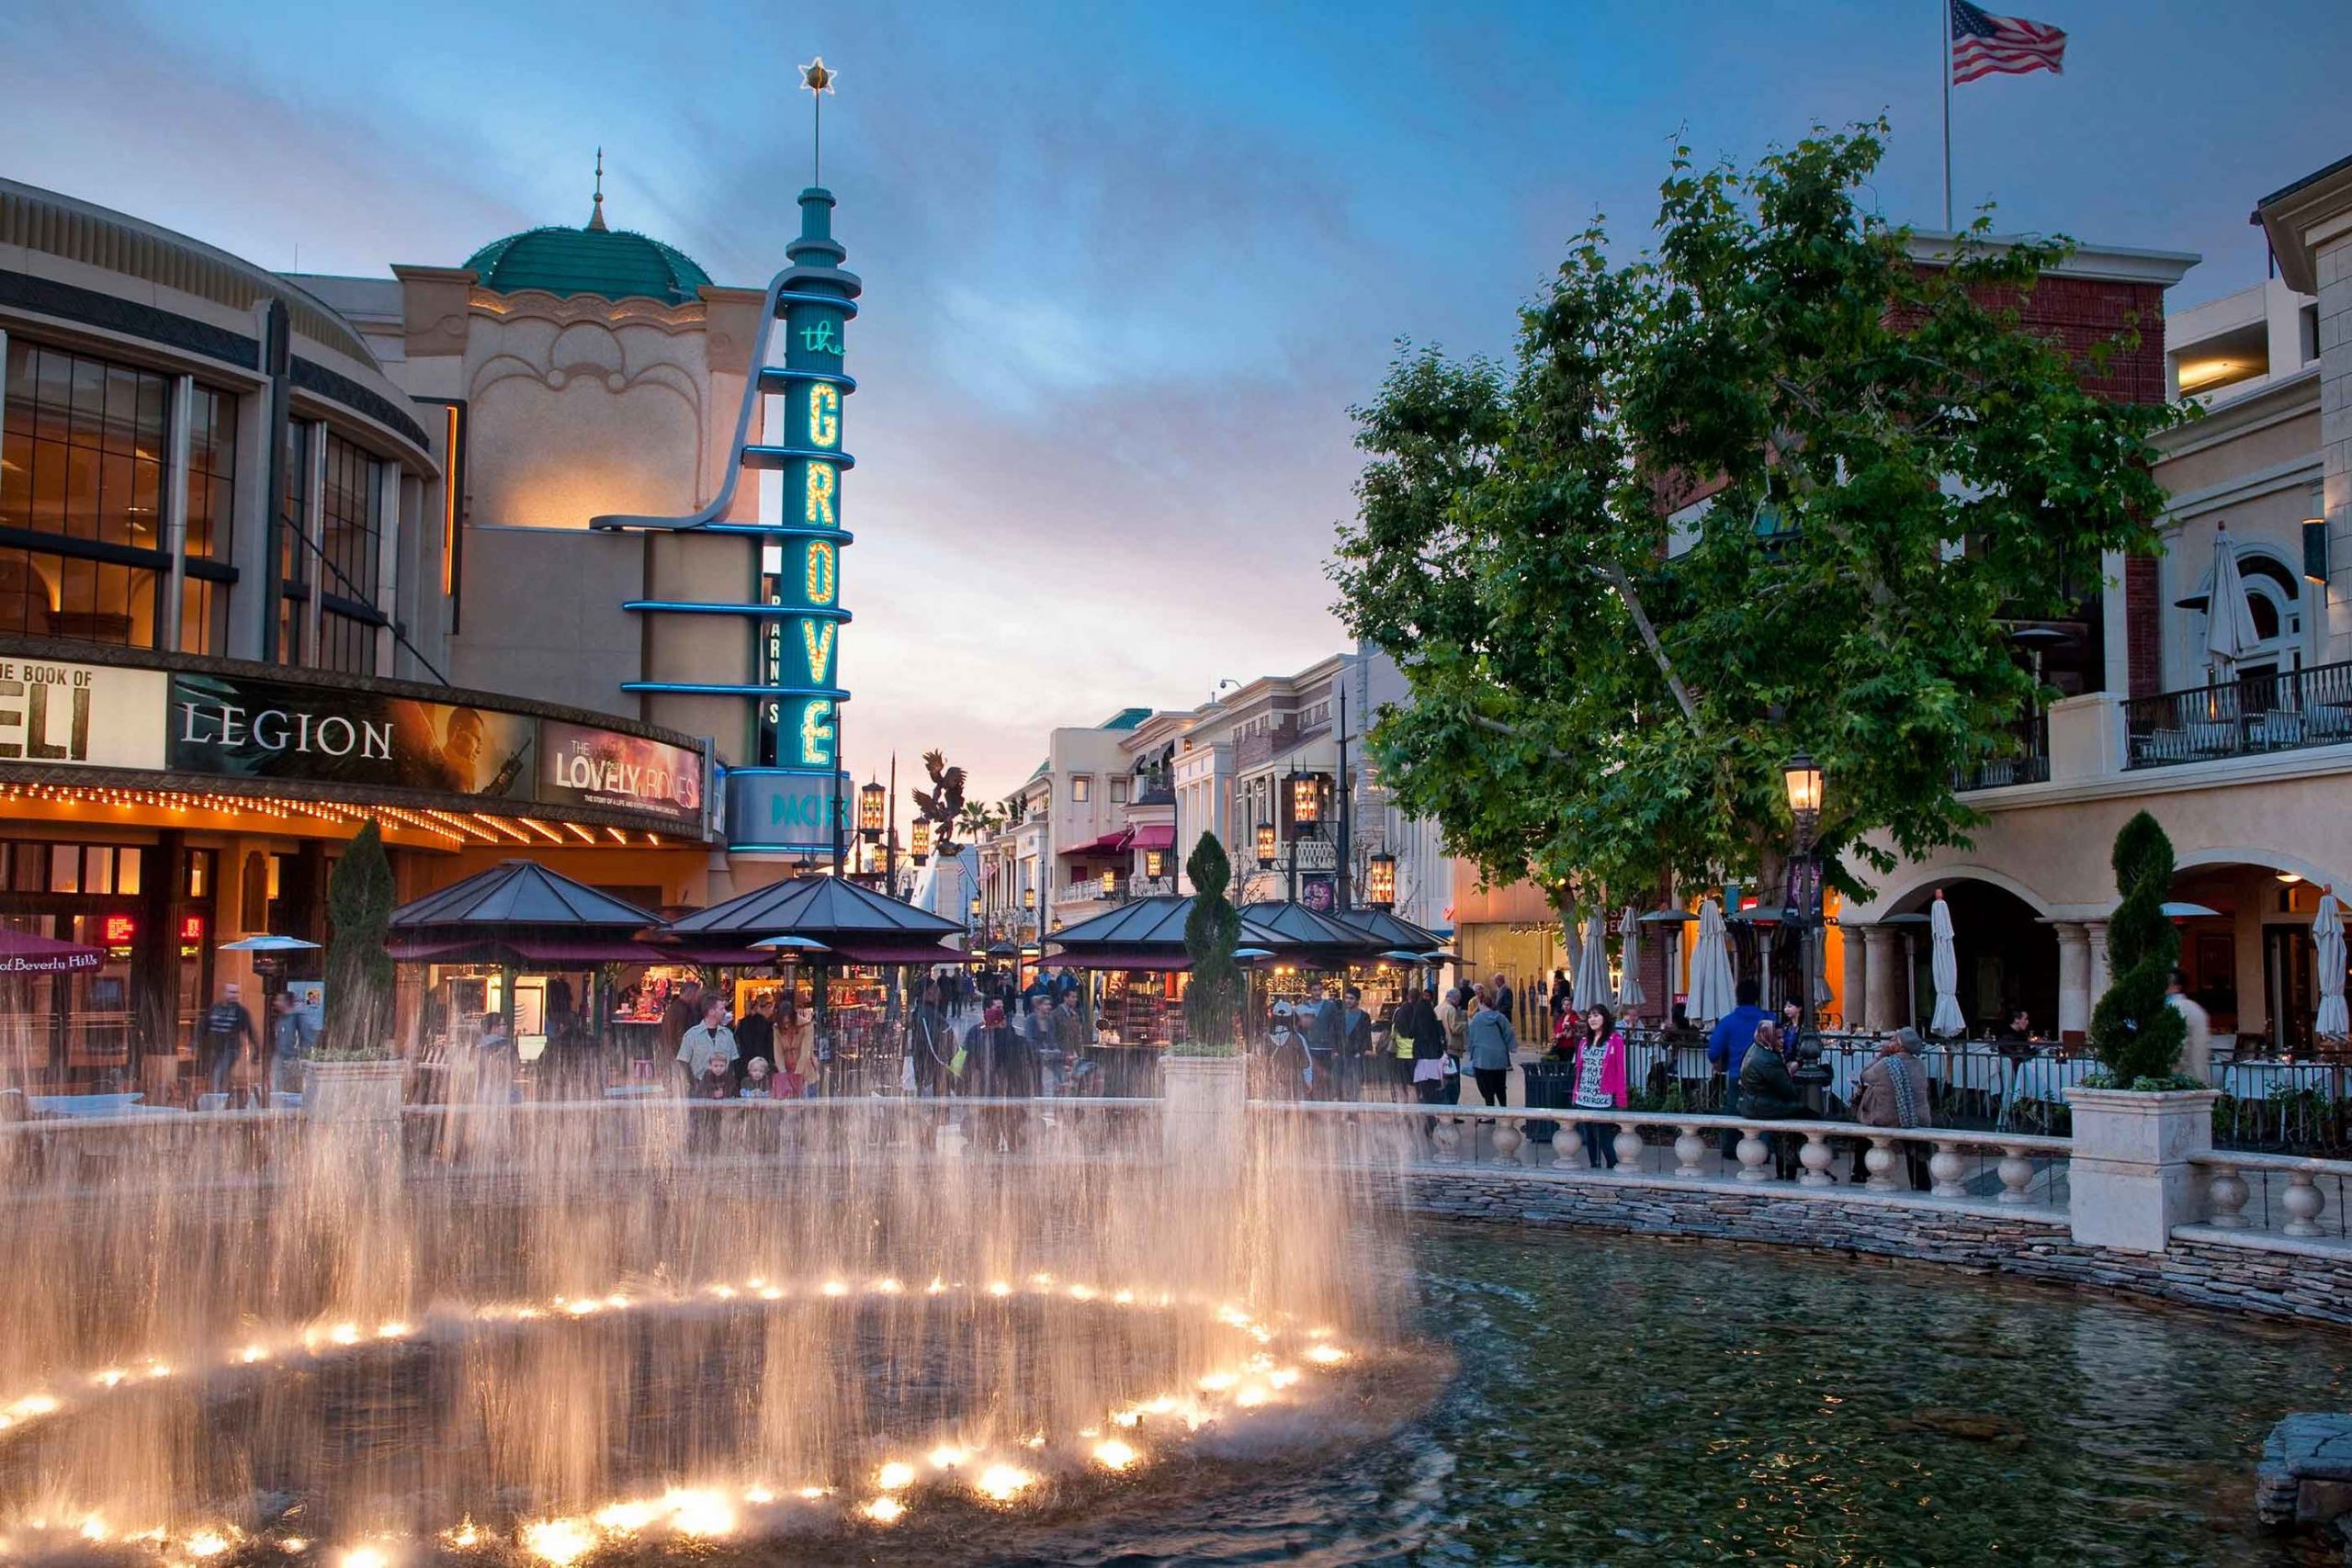 The Grove Hero shopping center located in downtown Los Angeles with water fountain